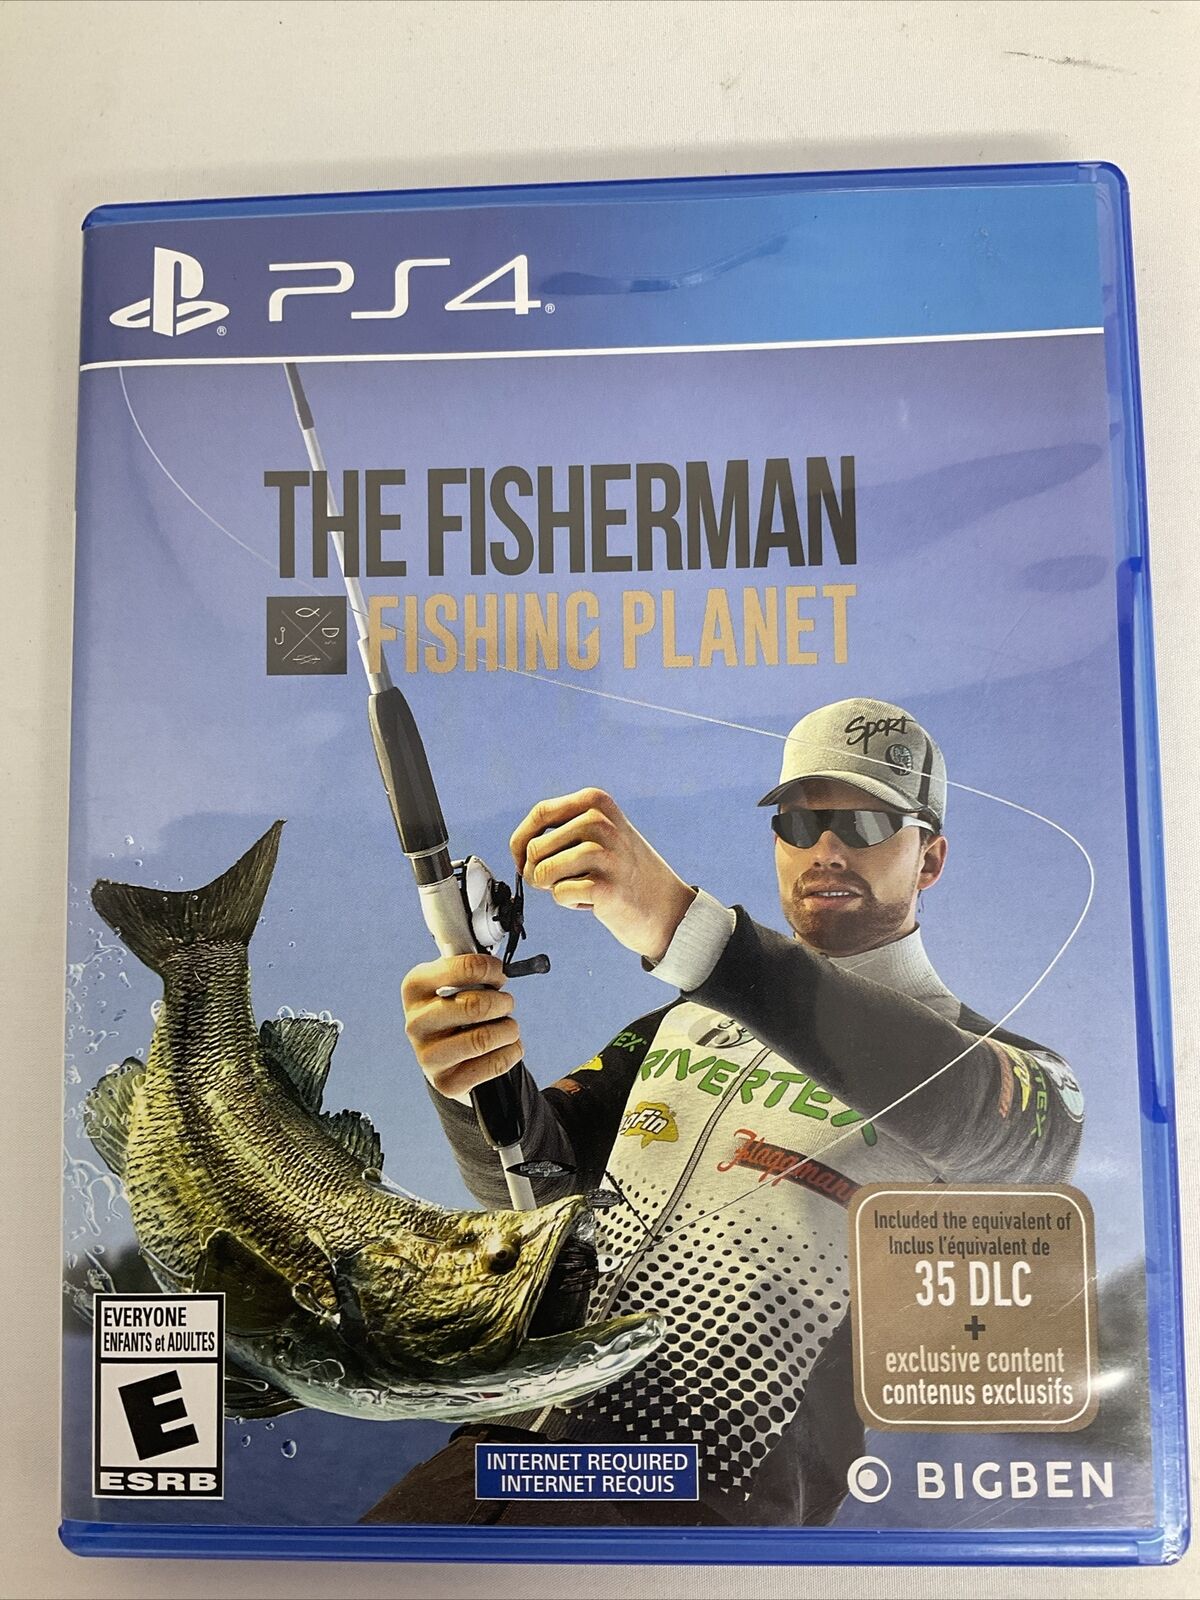 The Fisherman: Fishing Planet - Sony PlayStation 4 for sale online